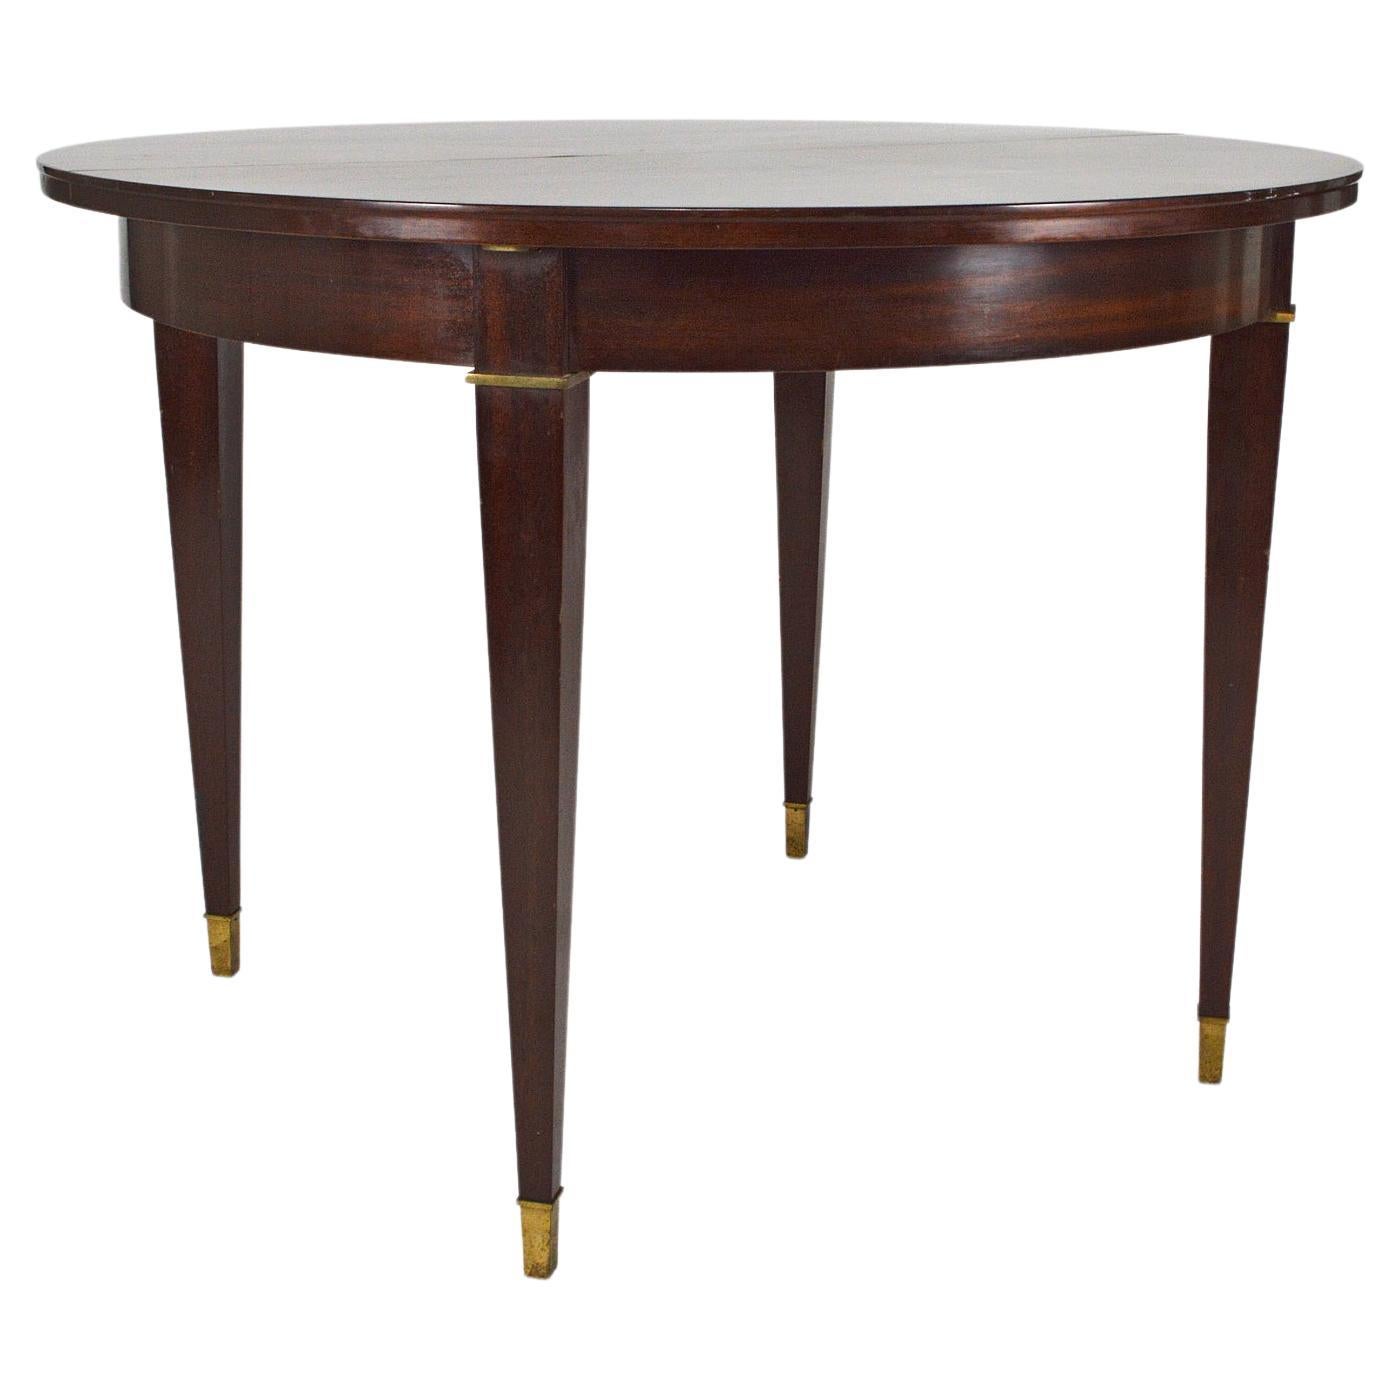 Art Deco Mahogany Round Table with Extensions, by Jacques Adnet, circa 1940 For Sale